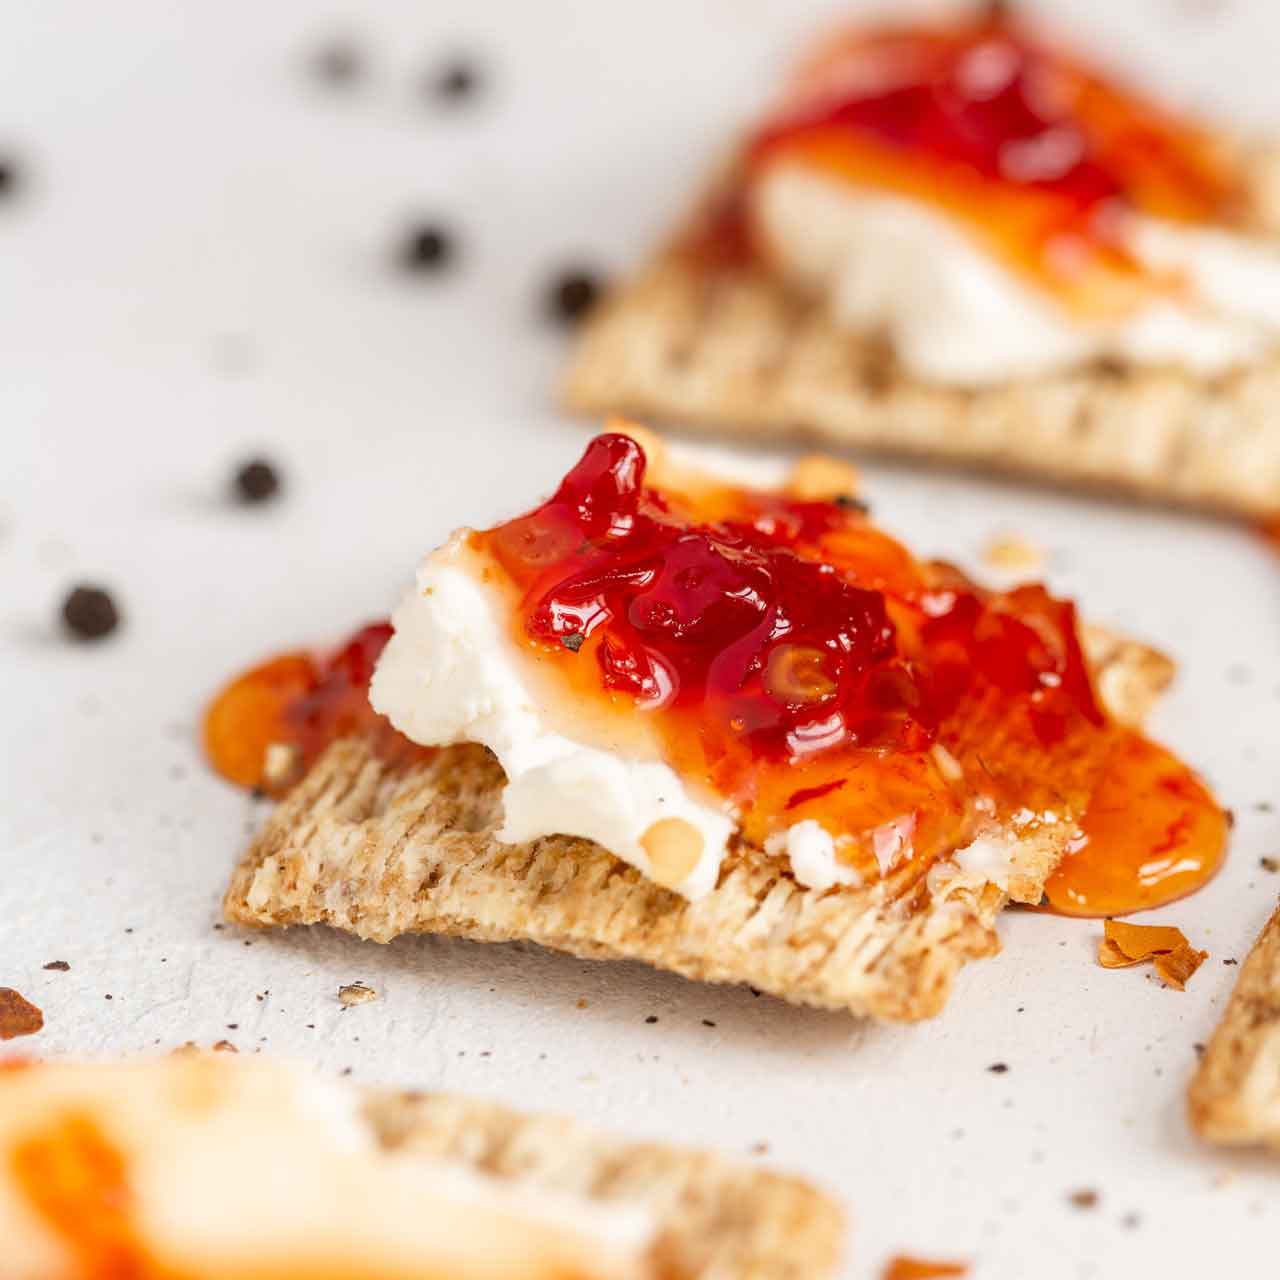 cracker with red pepper jelly